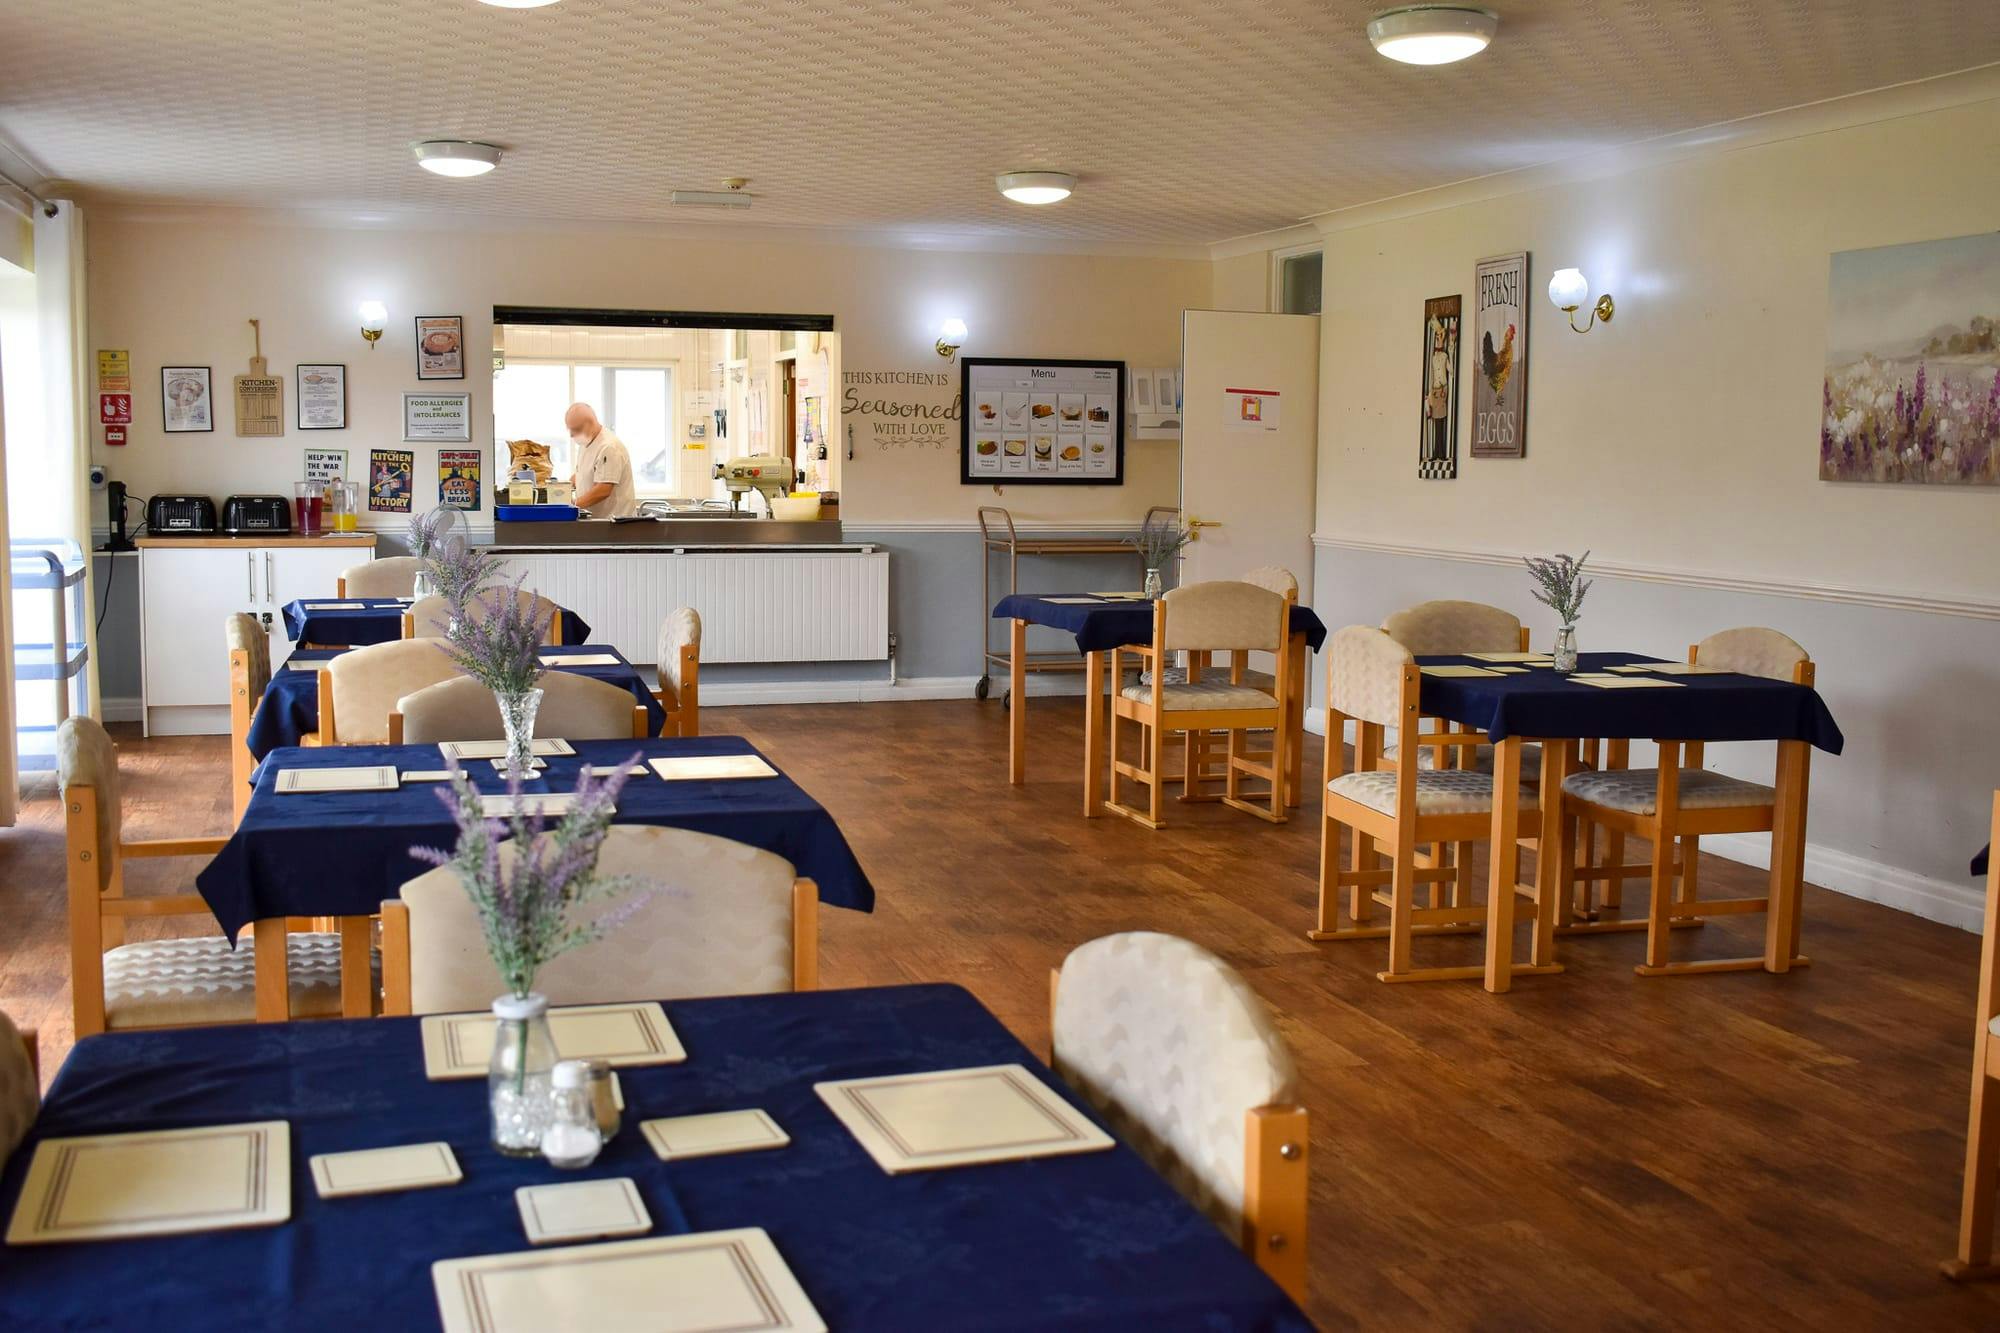 Dining area at Mahogany Care Home, Newtown, Wigan, Lancashire